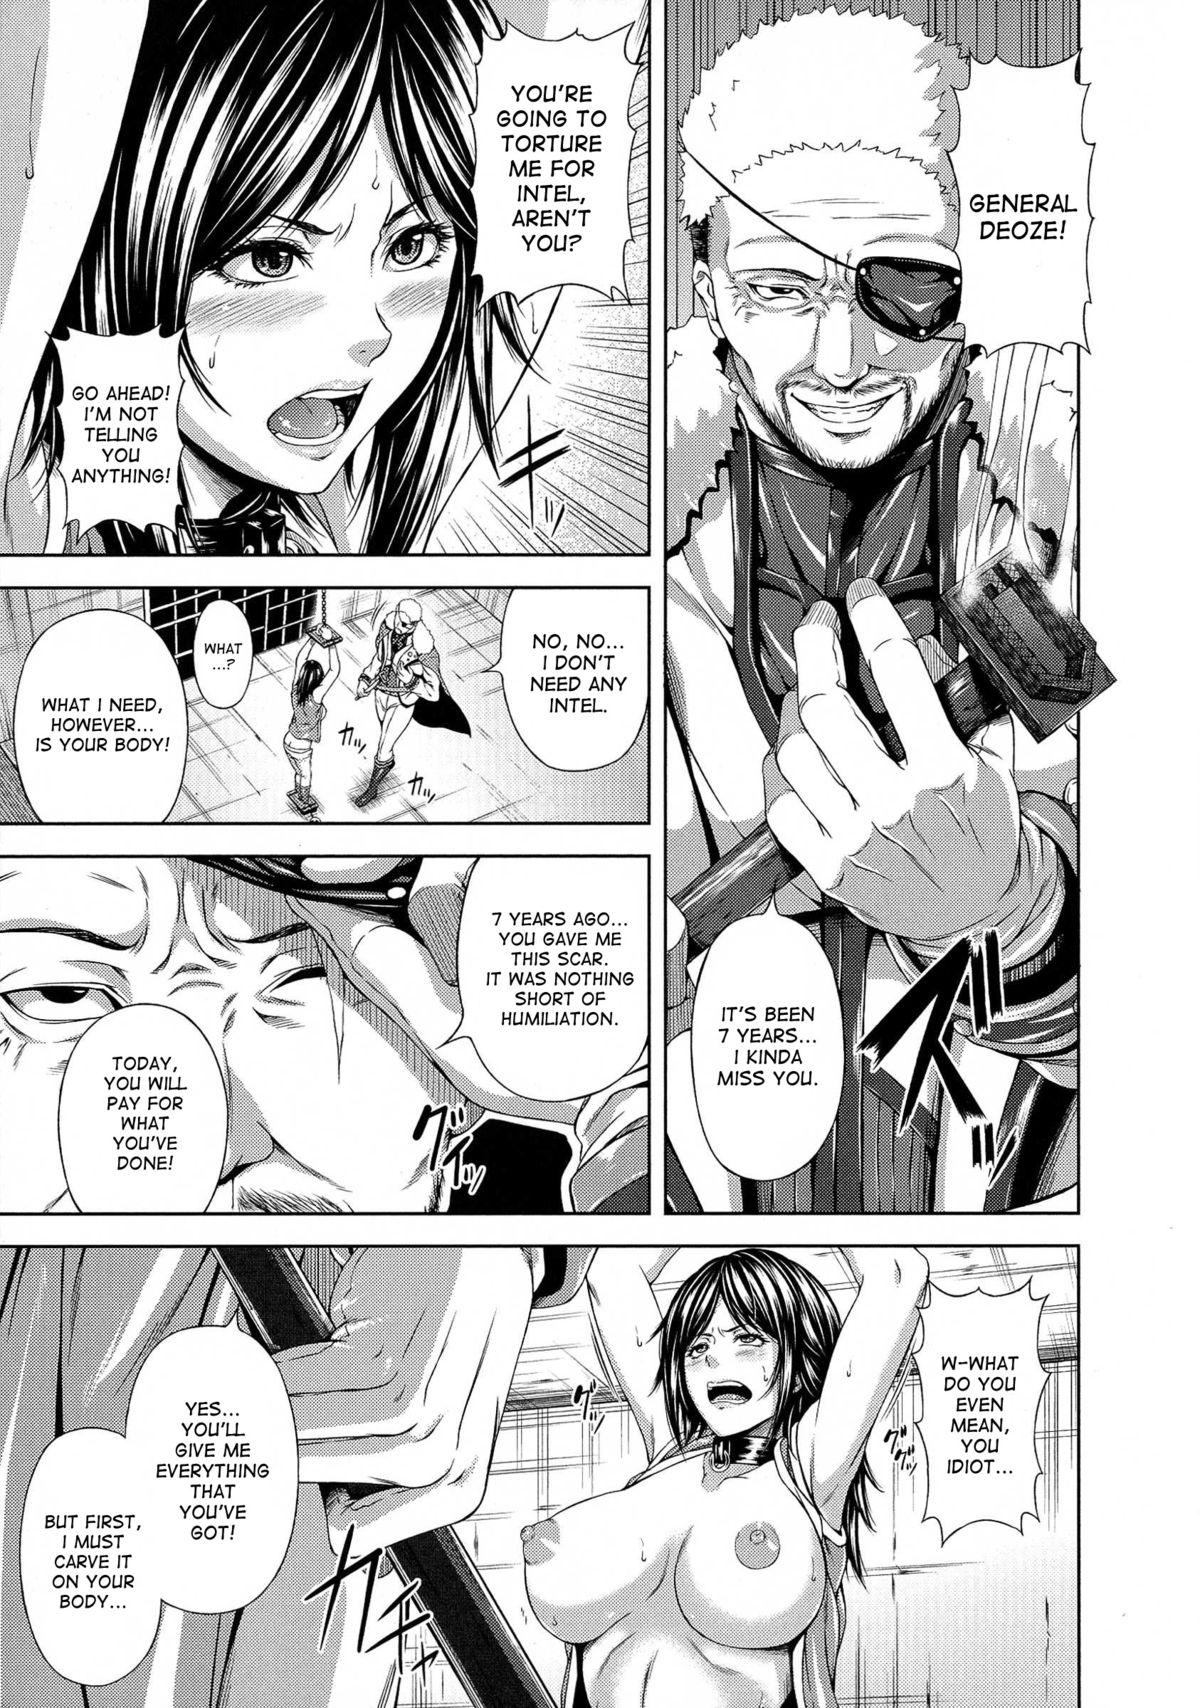 Gapes Gaping Asshole Ikusaotome no Kainin Choukyou | The Battle Maiden's Conception Training Bwc - Page 7